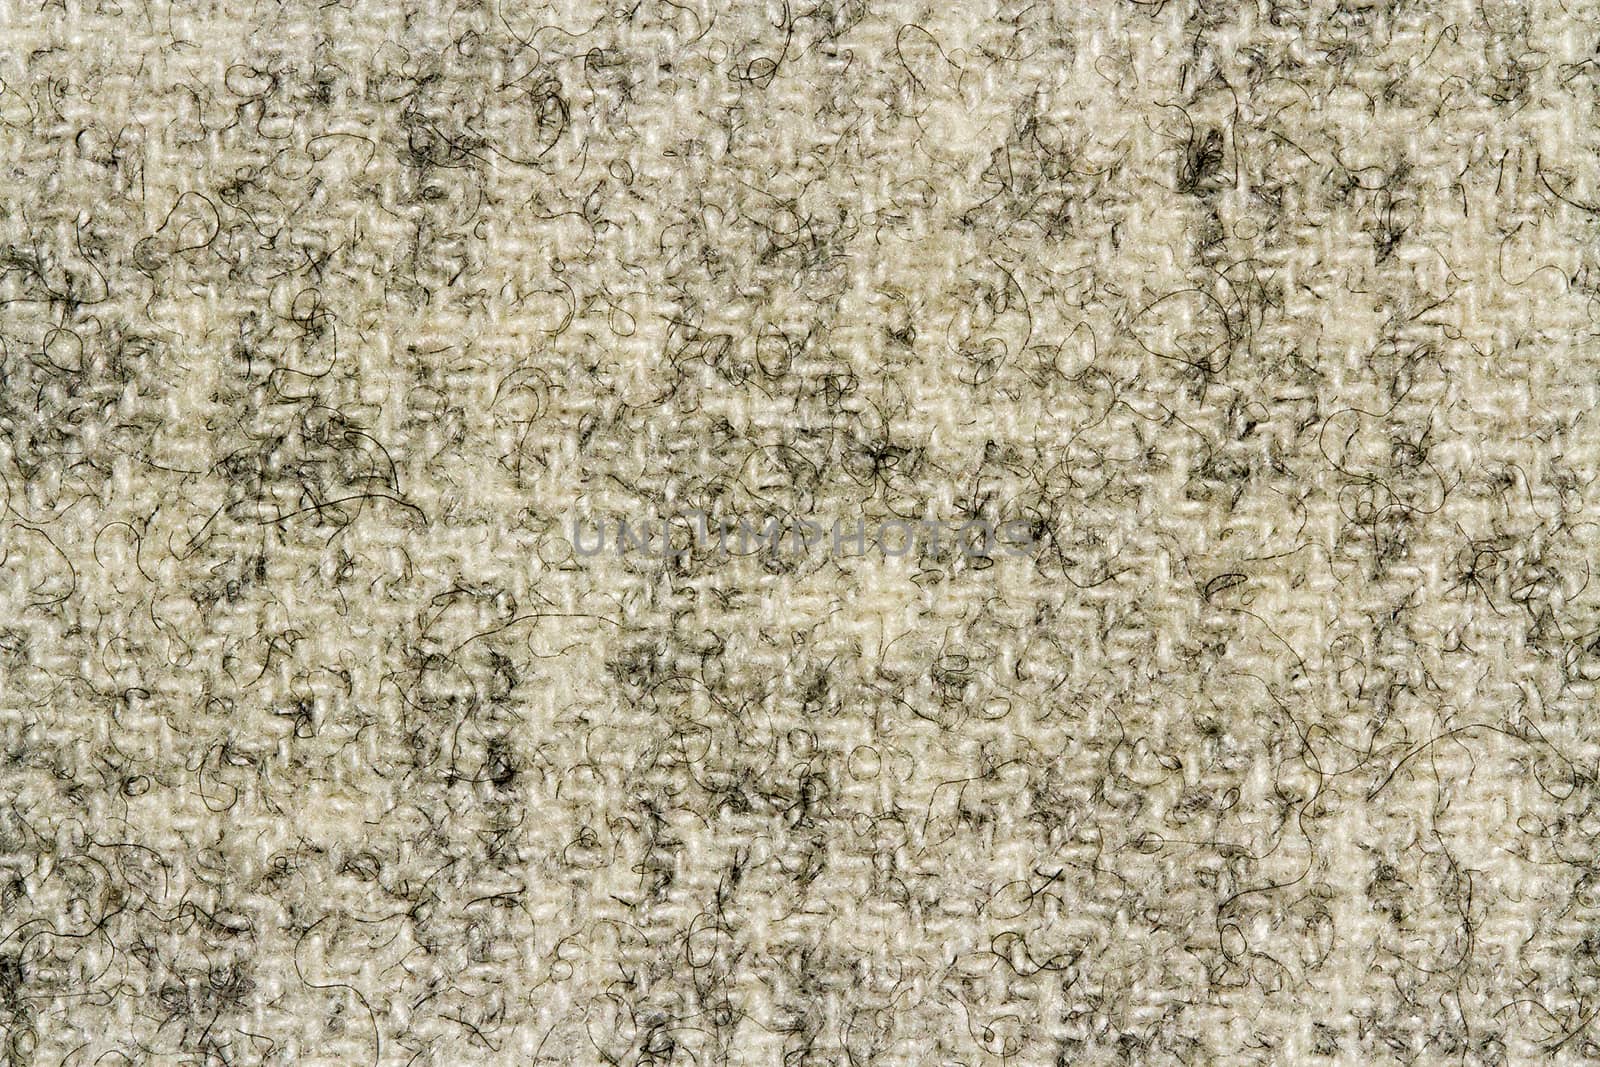 Brown carpet texture for the background for text area